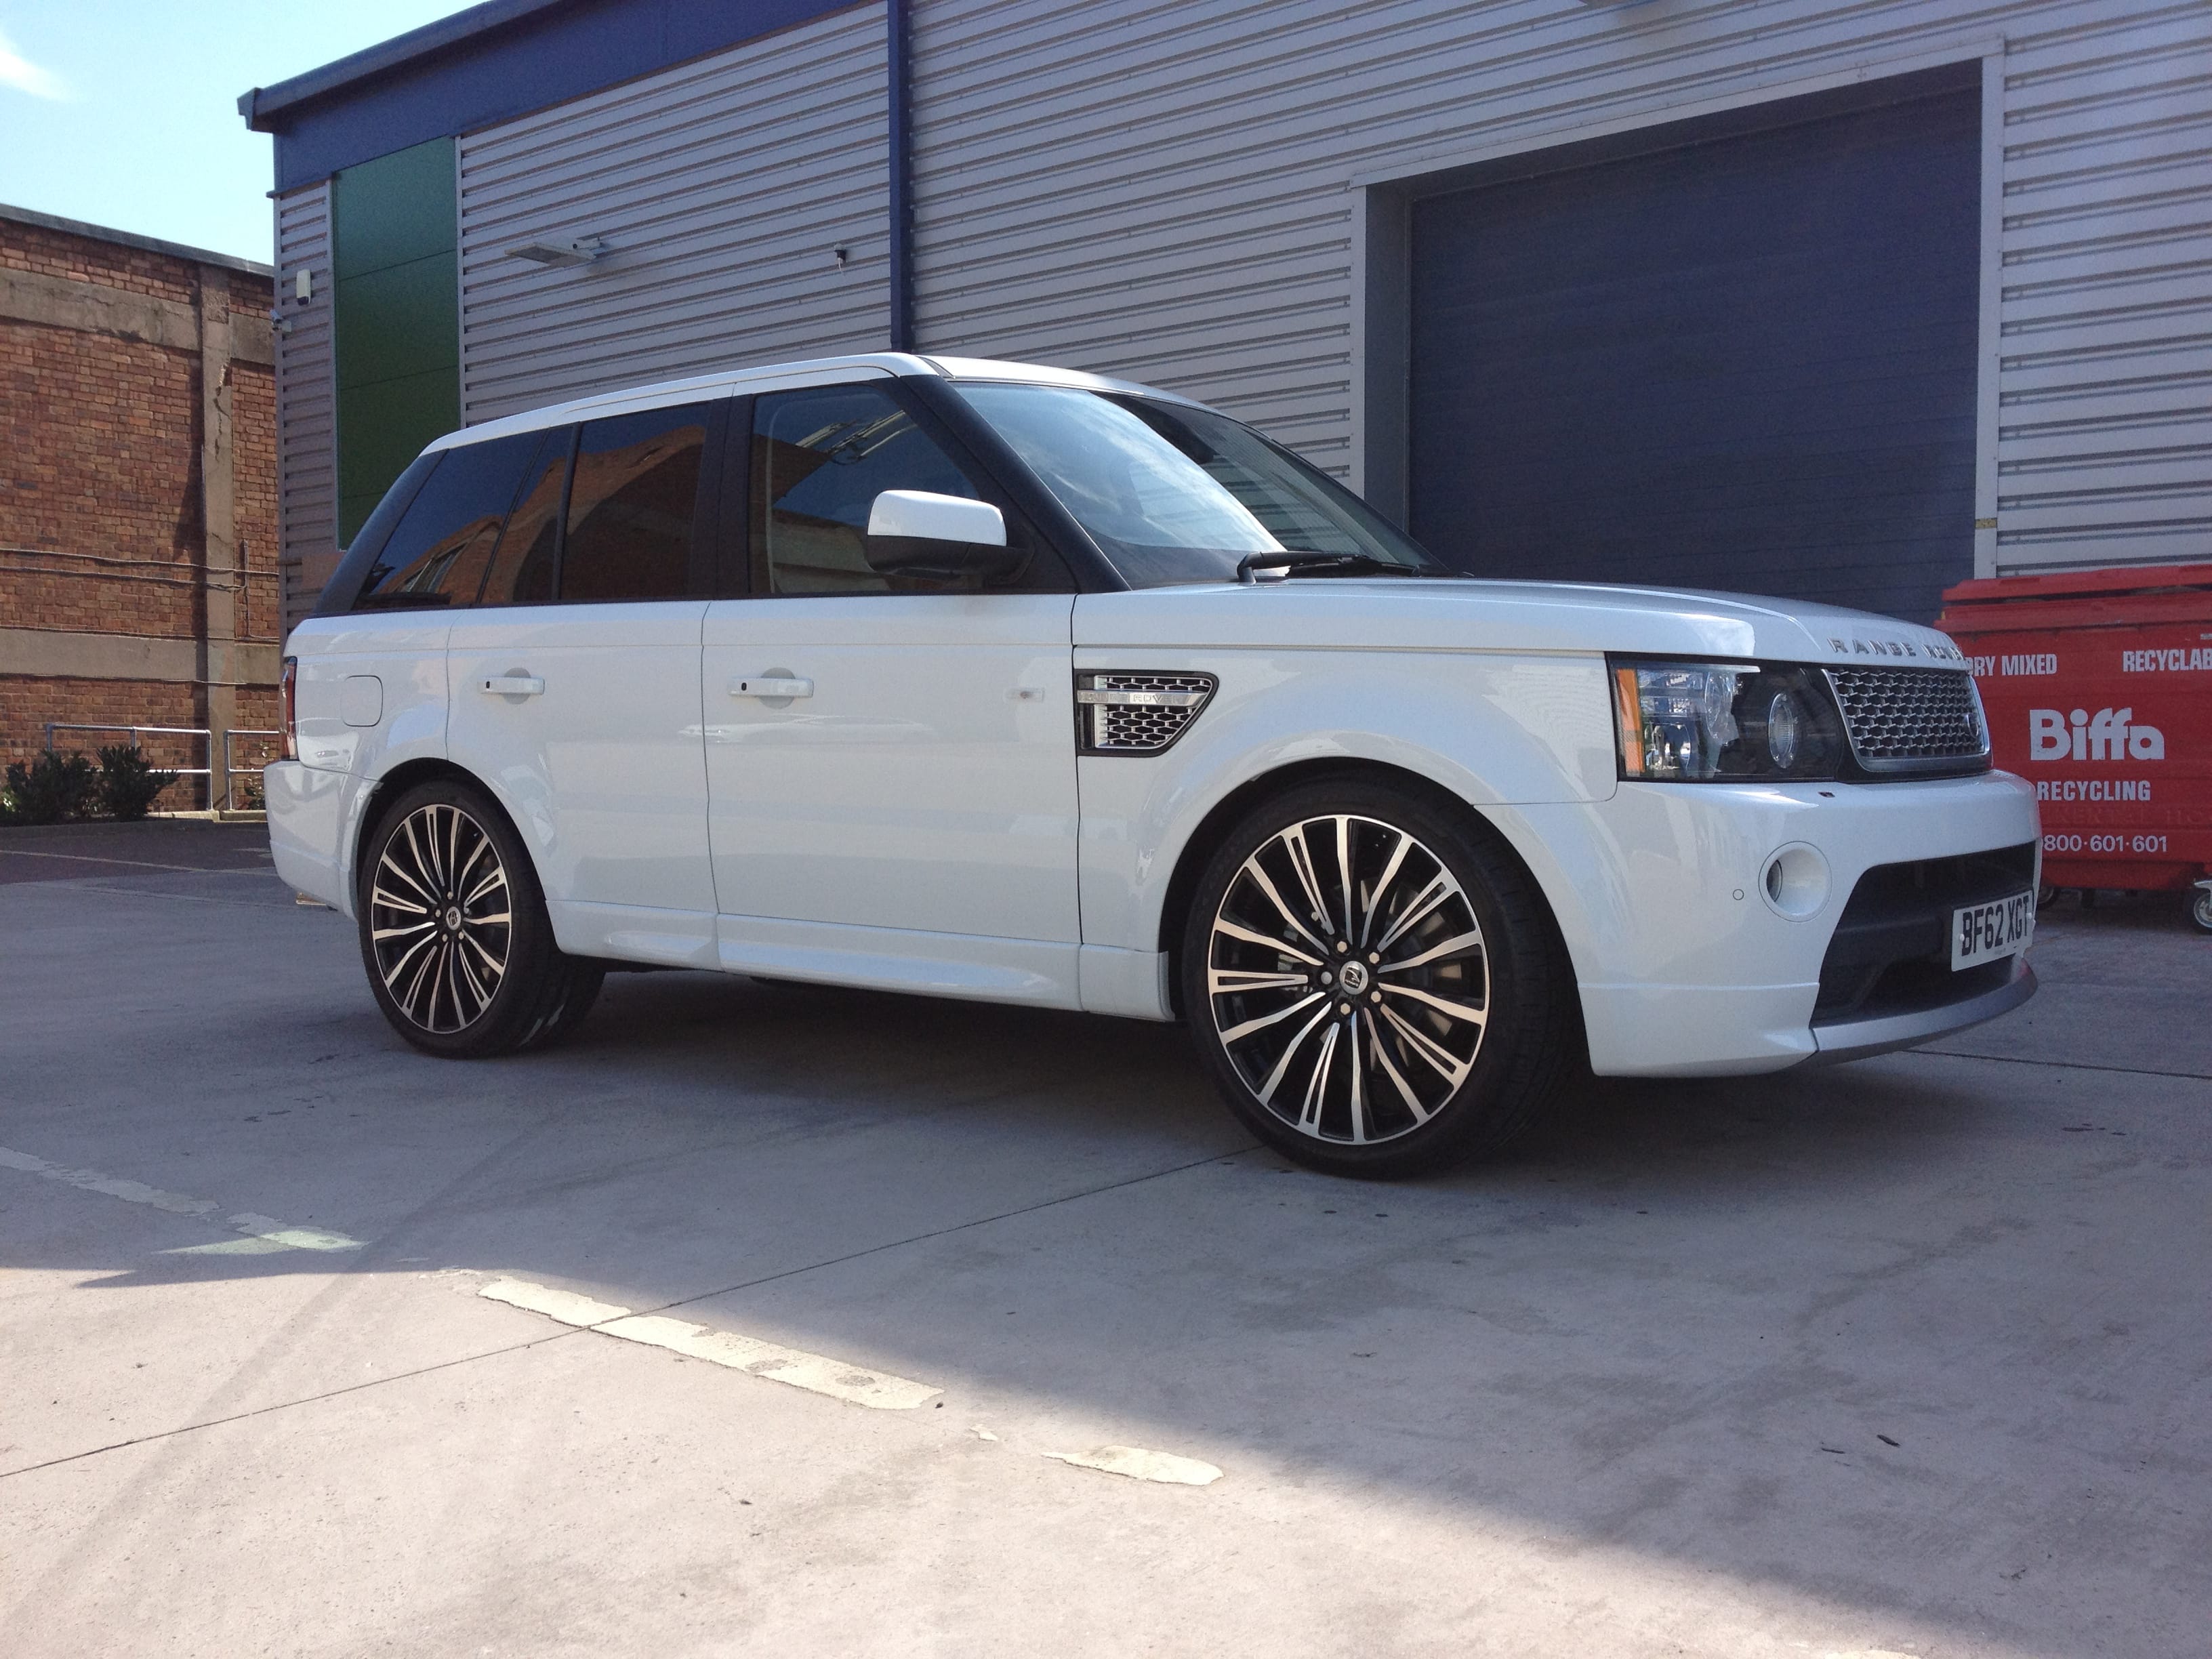 2012 Range Rover Sport Autobiography fitted with Hawke Chayton in Java black